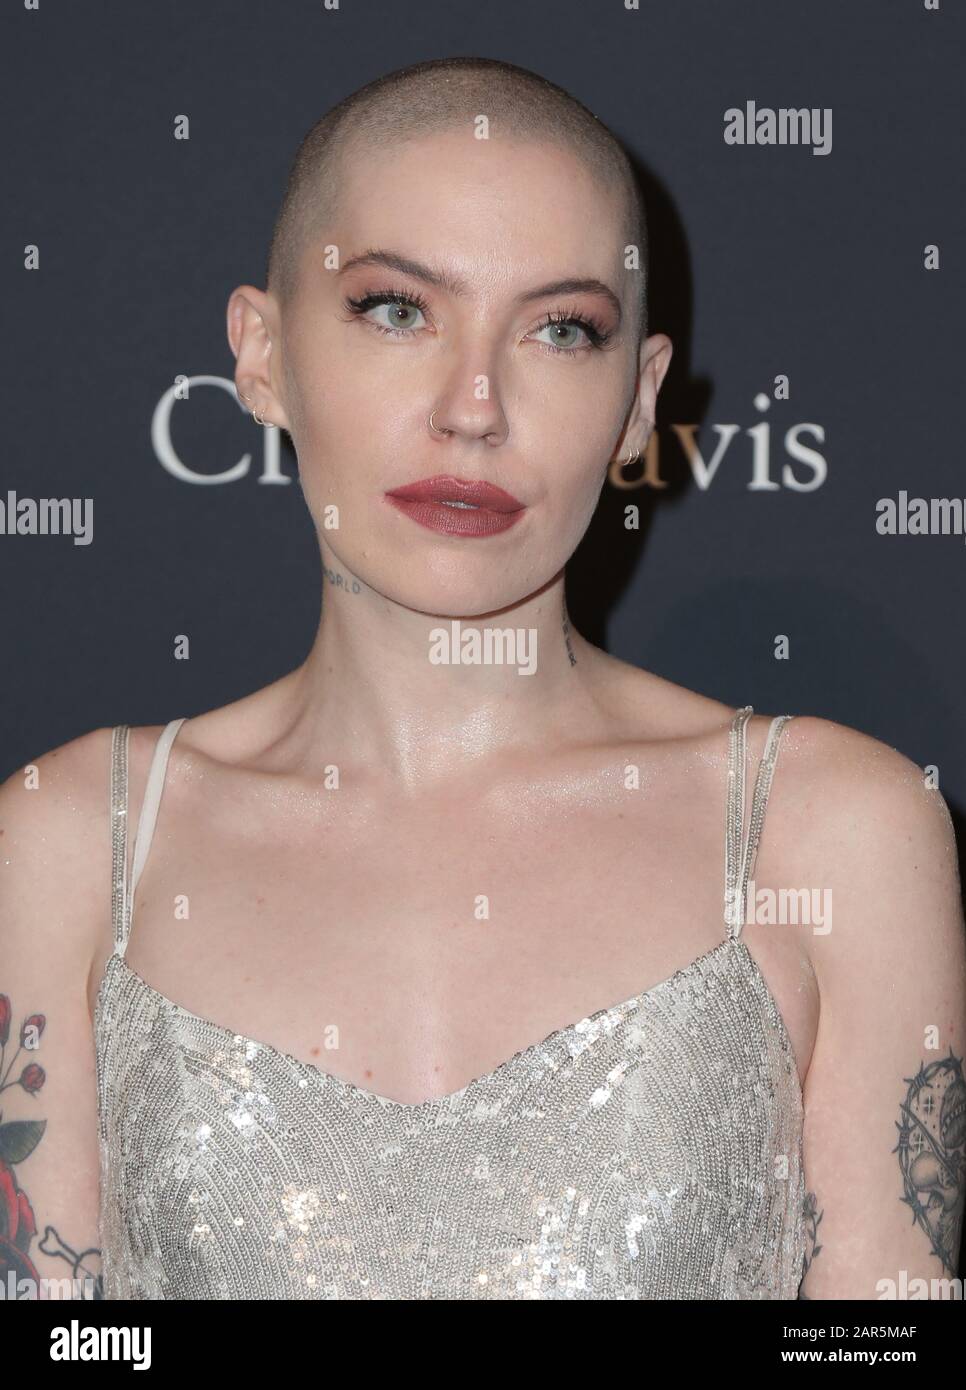 Bishop Briggs walking the red carpet at the Clive Davis' 2020 Pre-Grammy  Gala held at The Beverly Hilton Hotel on January 25, 2020 in Los Angeles,  California USA (Photo by Parisa Afsahi/Sipa